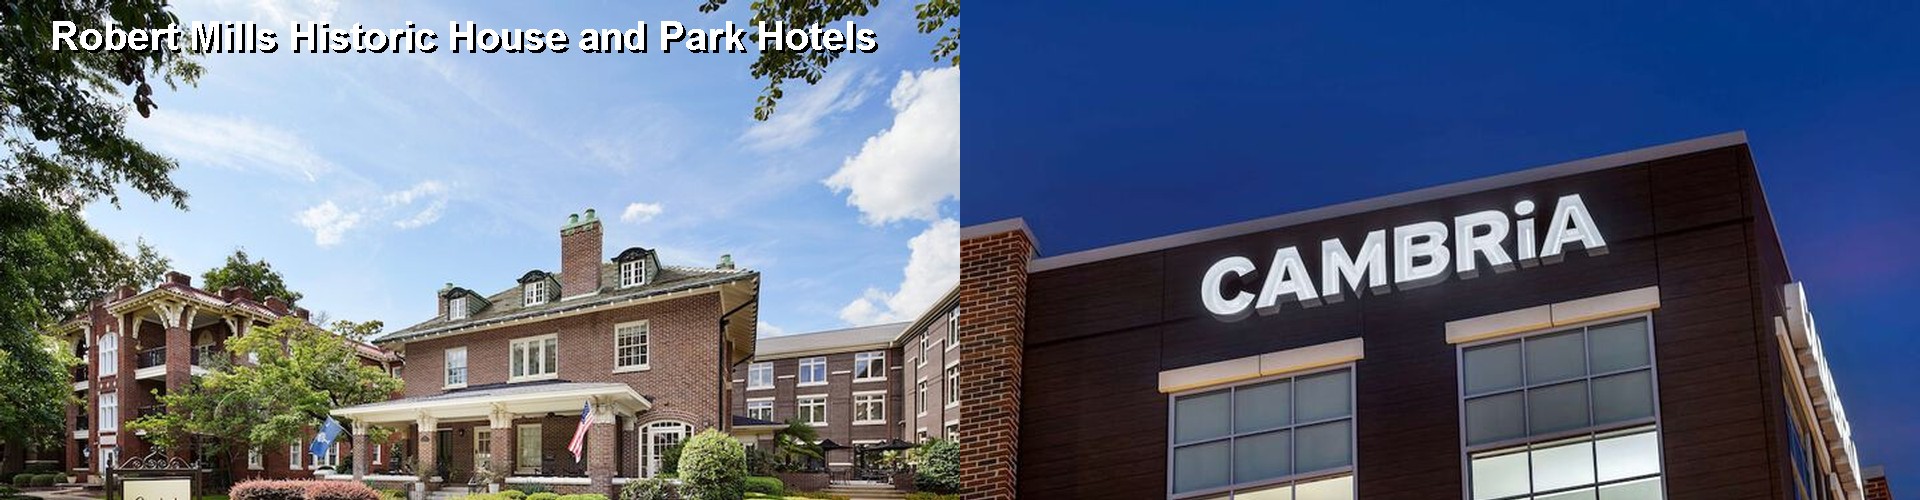 3 Best Hotels near Robert Mills Historic House and Park